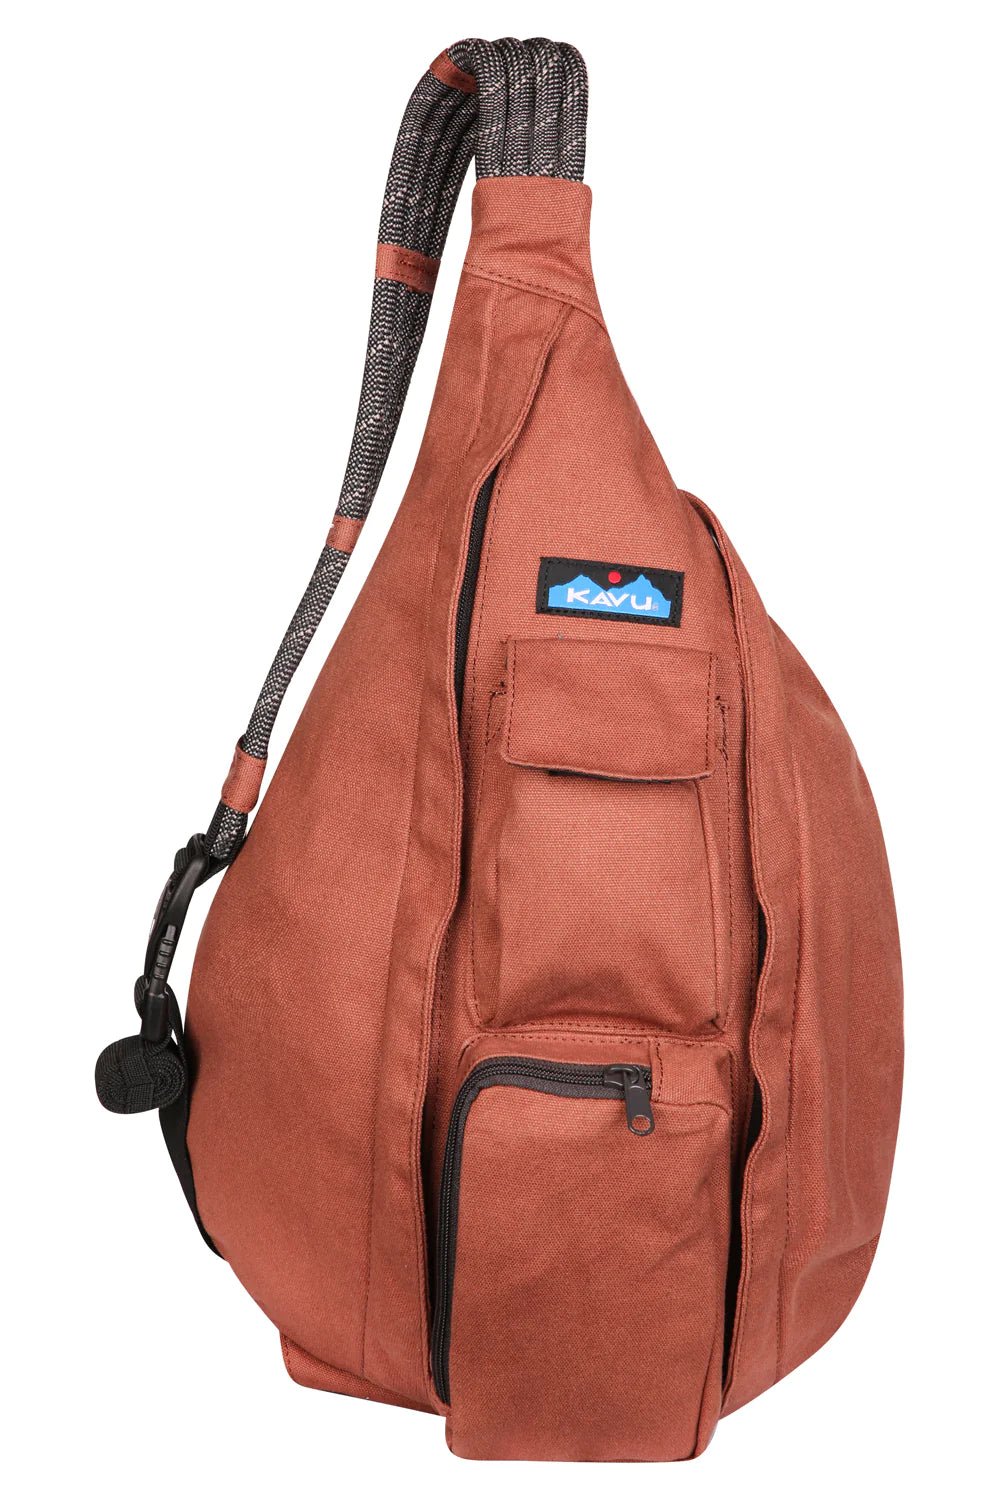 Boone Mountain Sports - ROPE BAG